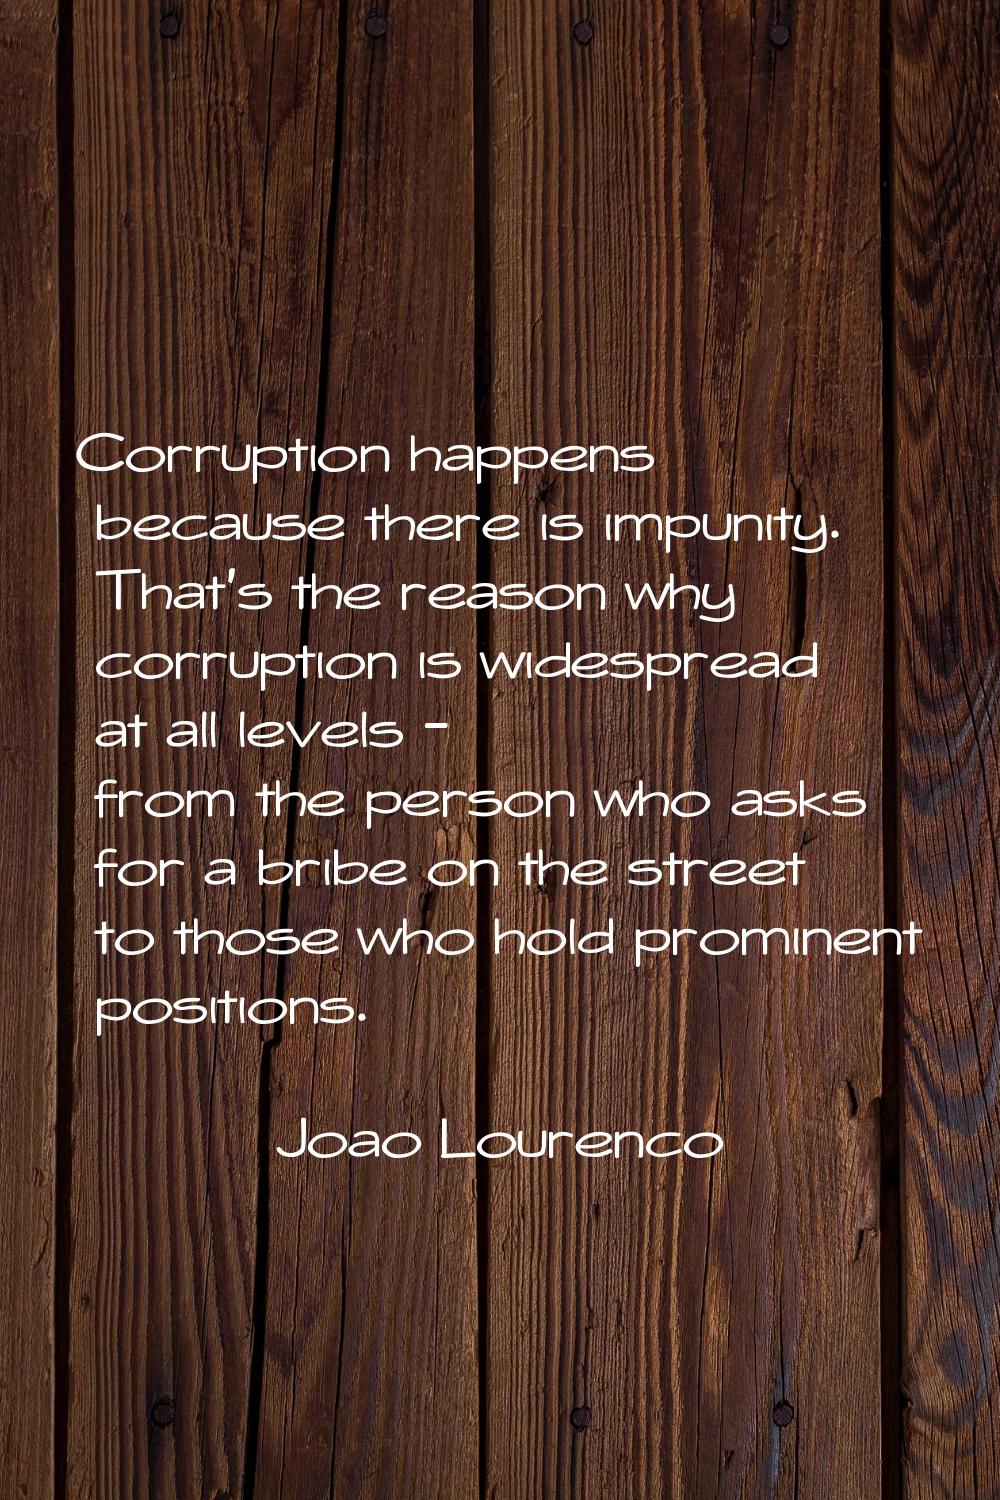 Corruption happens because there is impunity. That's the reason why corruption is widespread at all